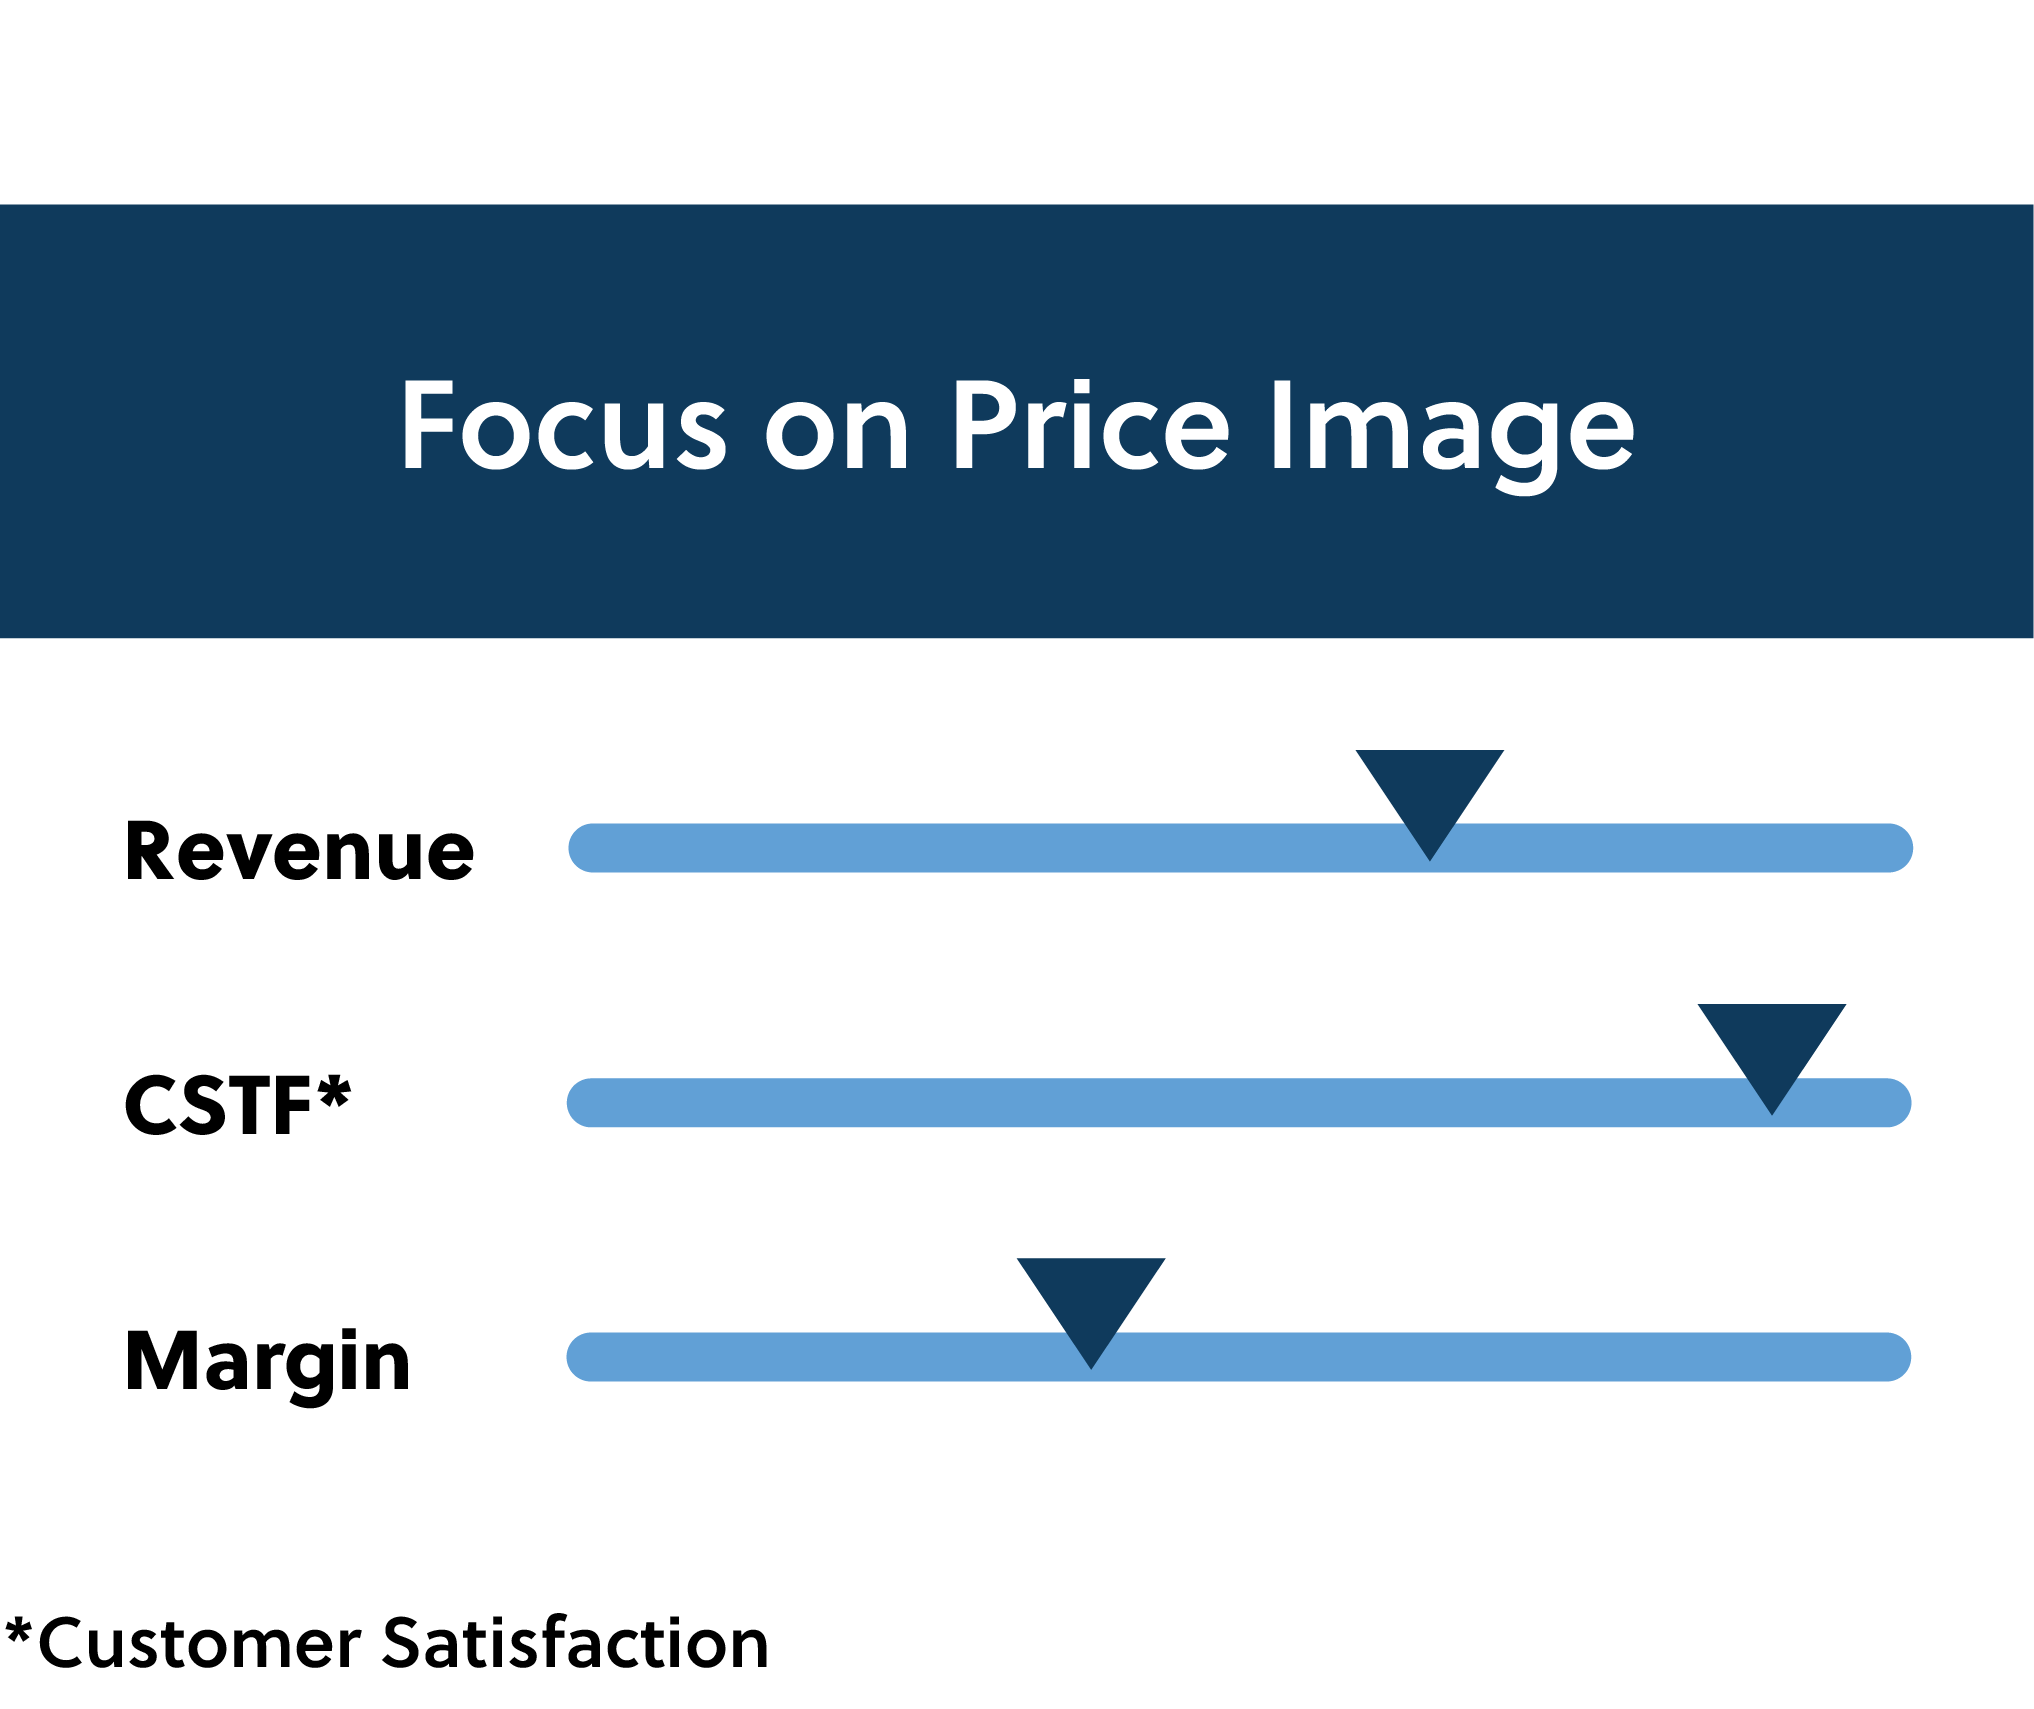 Market-based parts pricing due to optimized price image